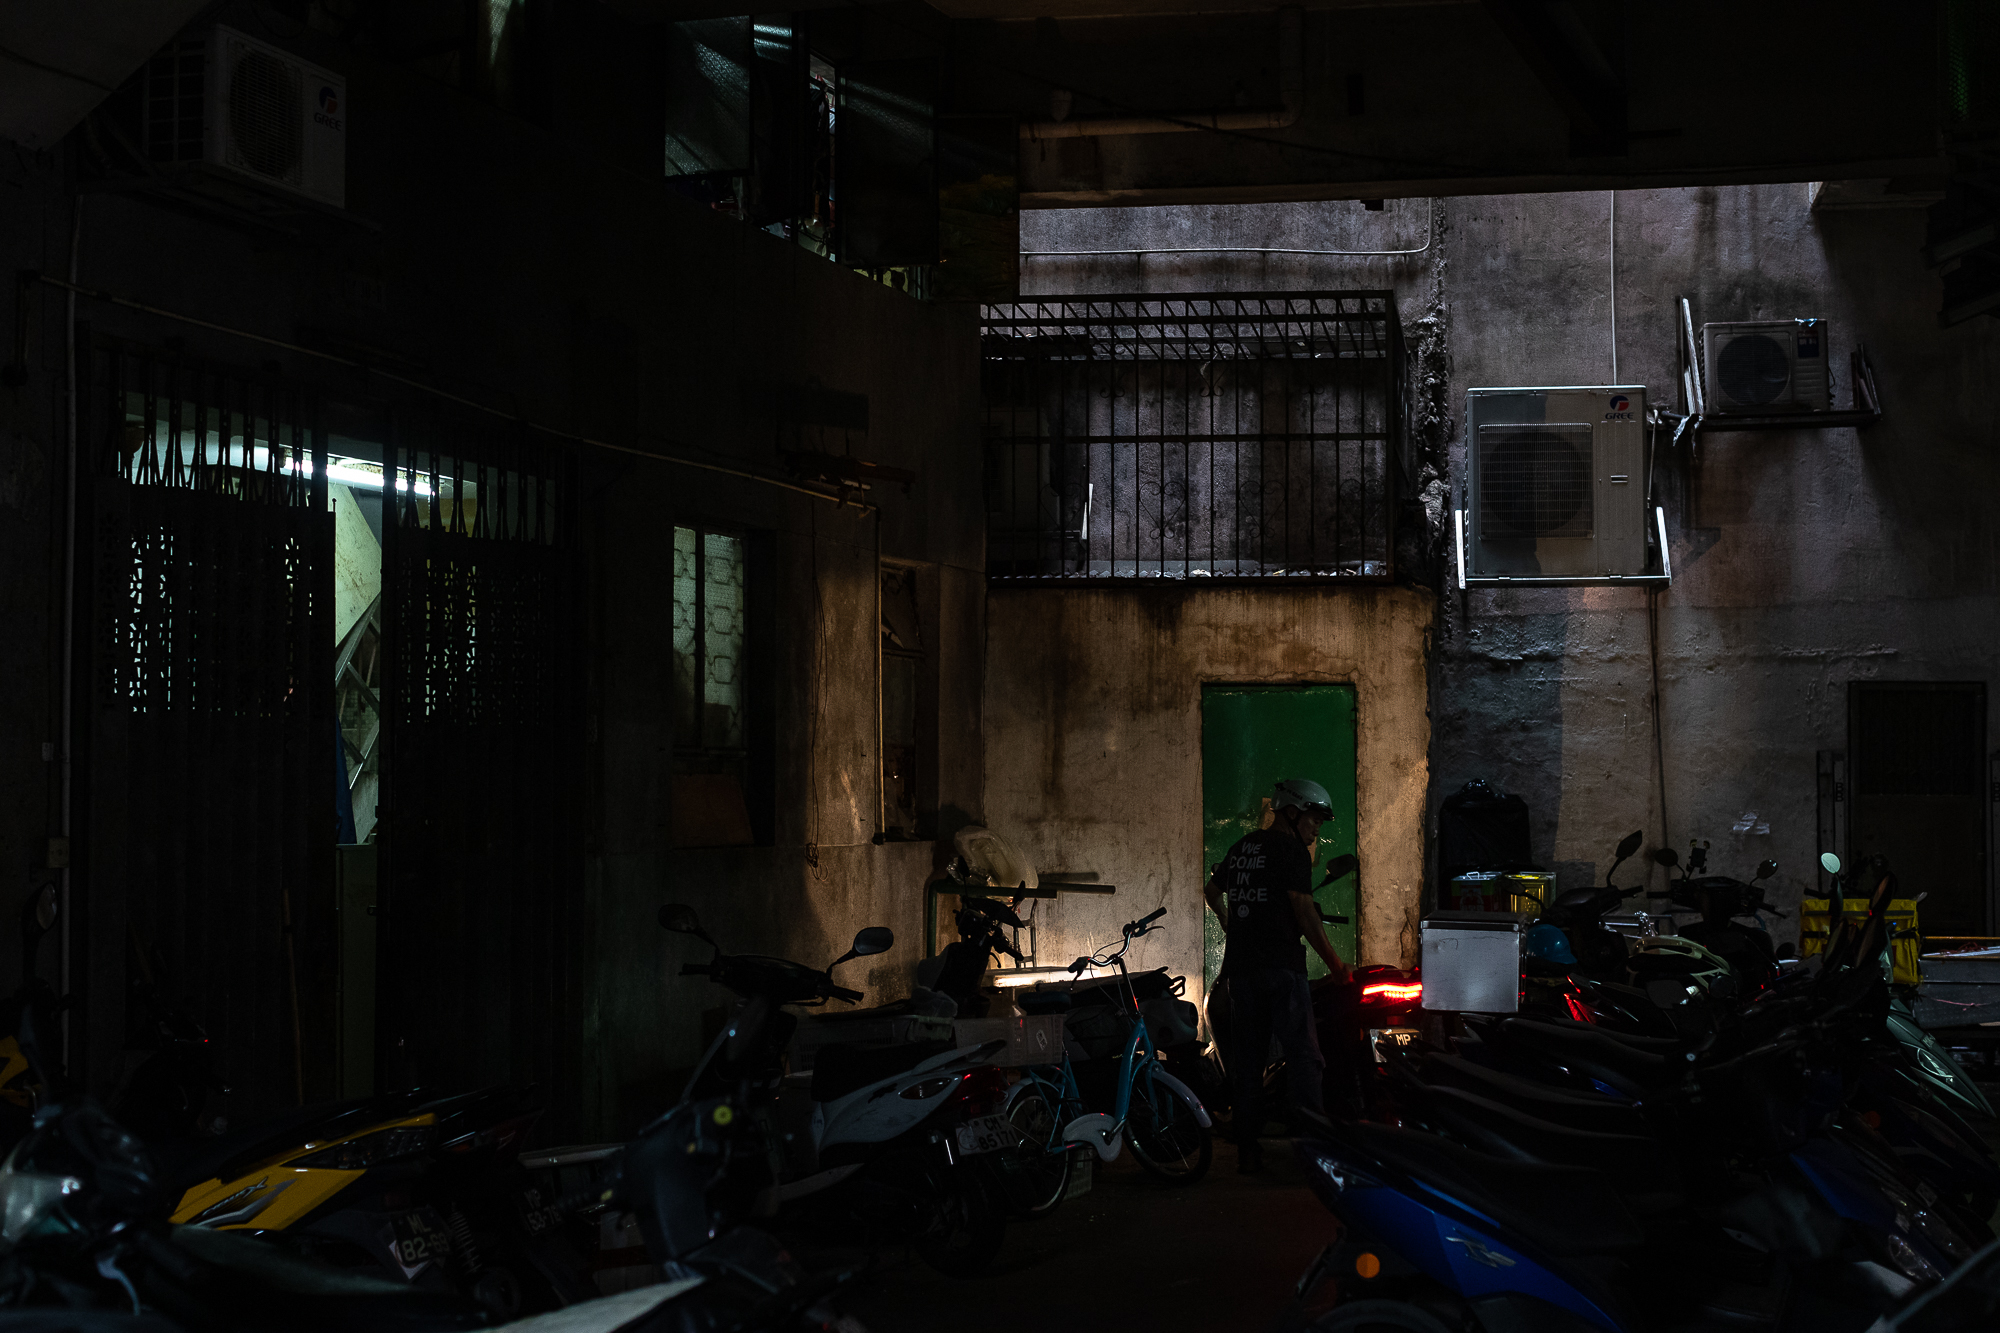 A rider readies his motorbike in an alley as daylight struggles to penetrate through the densely packed buildings